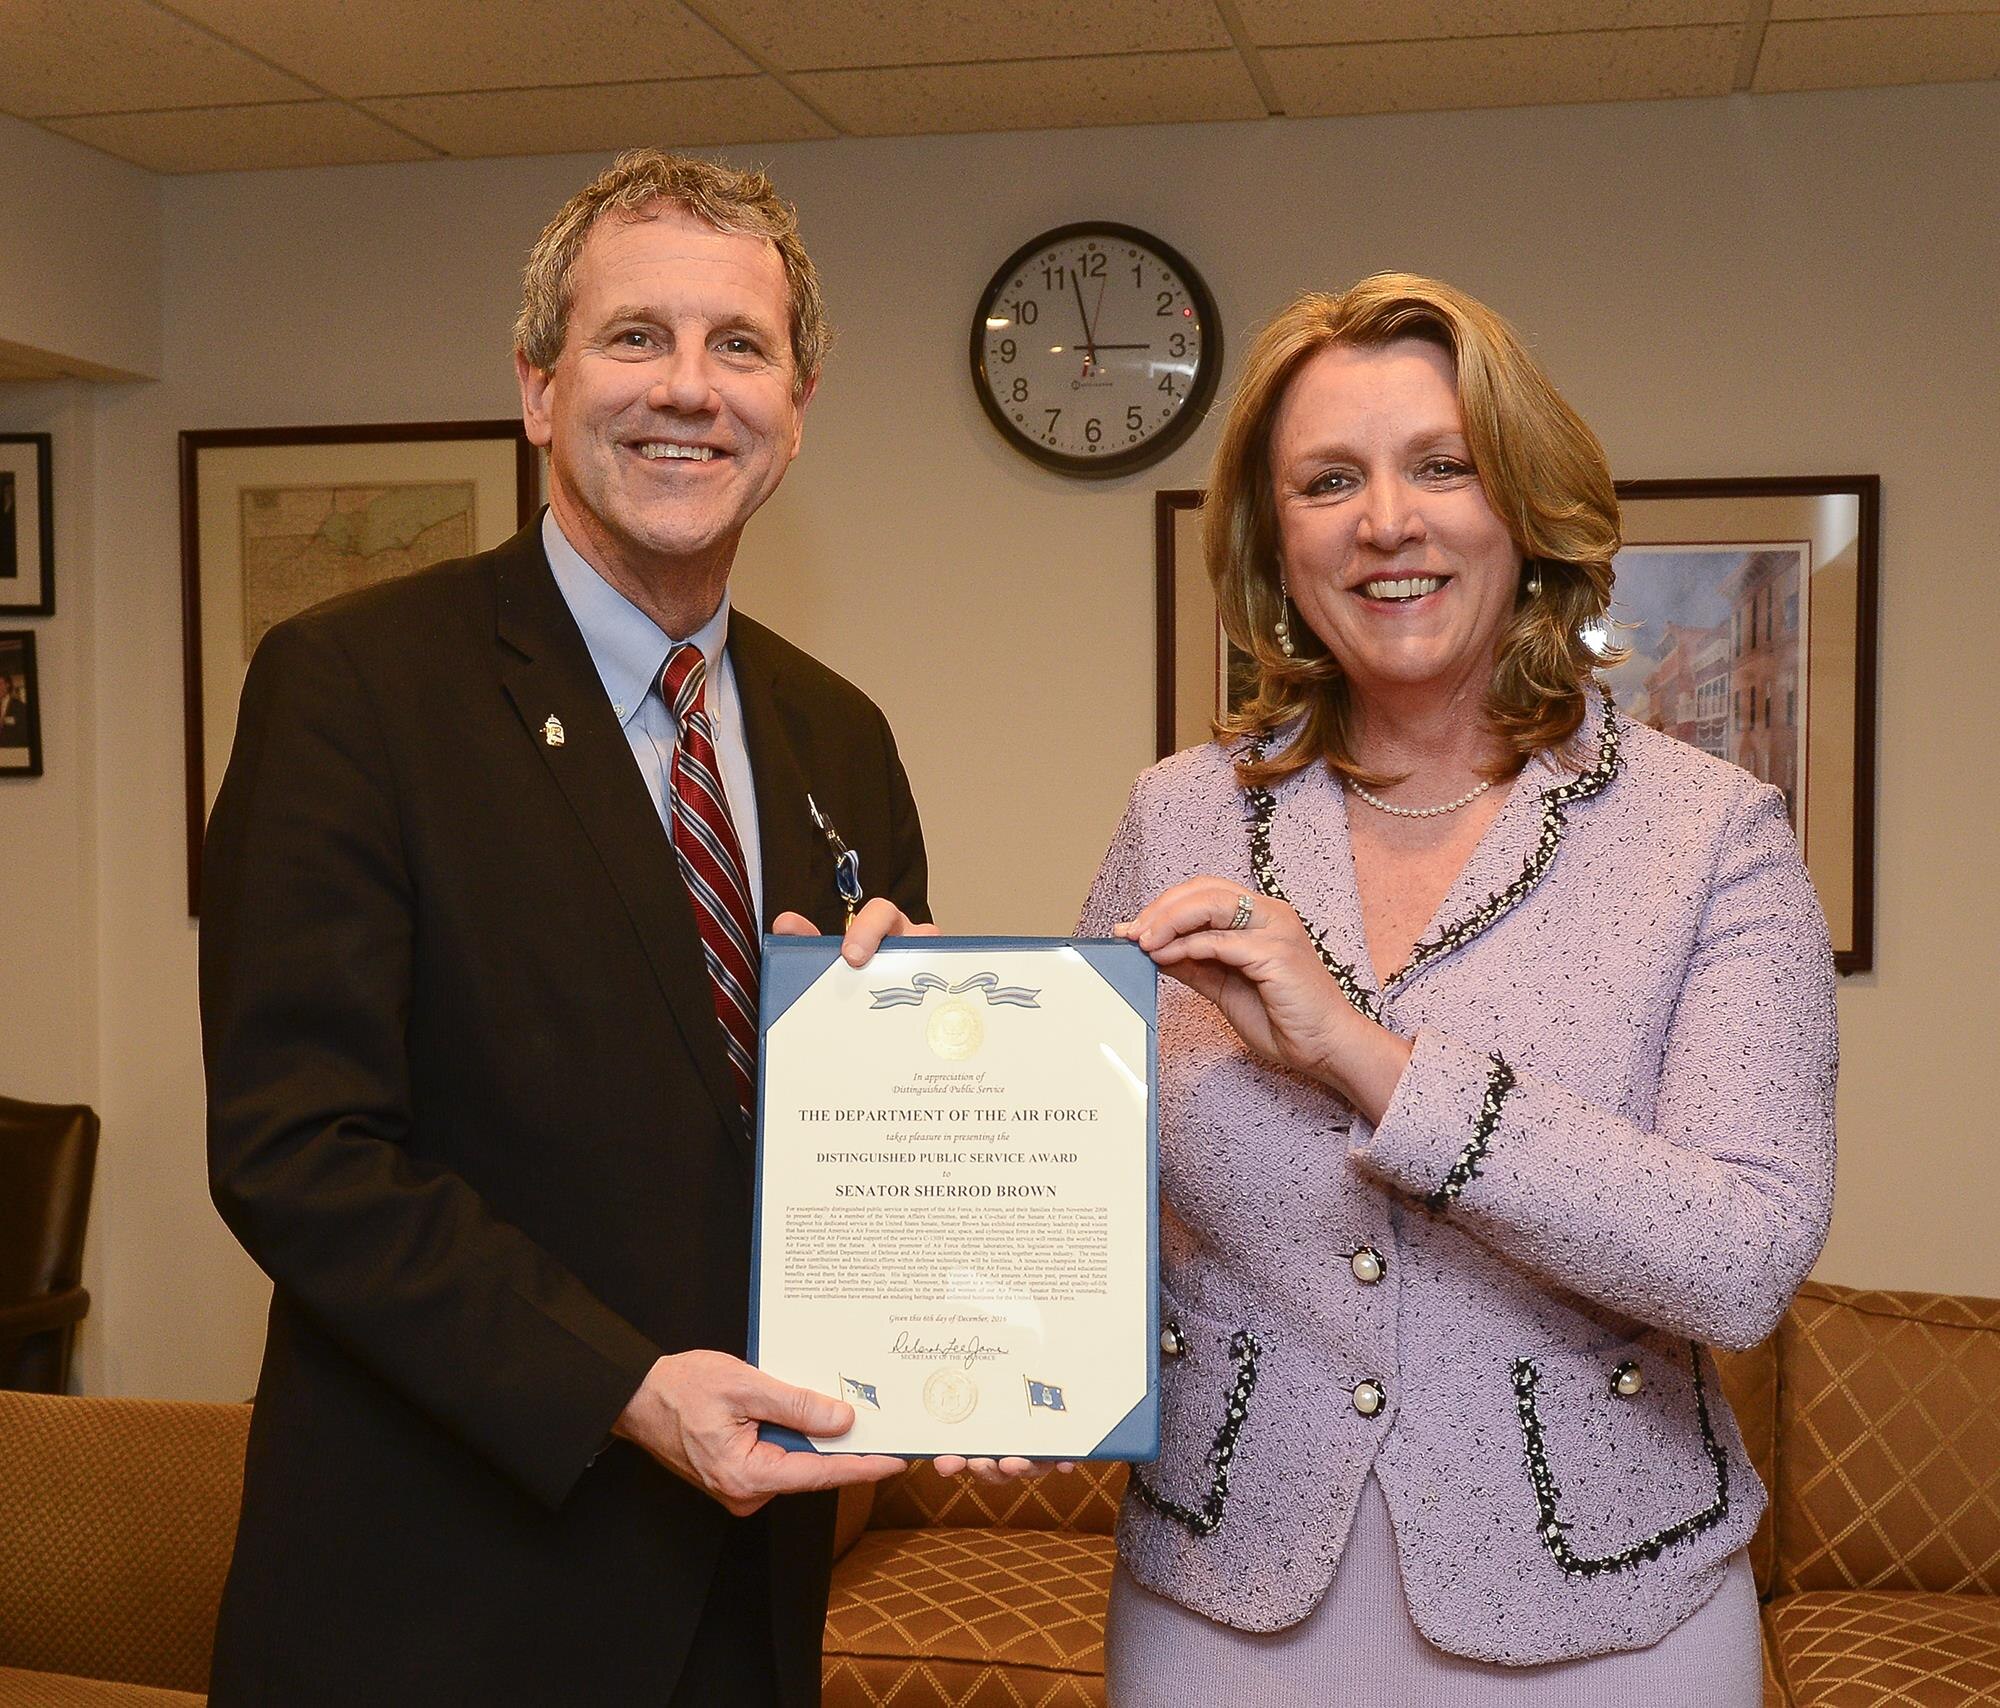 Air Force Secretary Deborah Lee James presents the Distinguished Public Service Award to U.S. Sen. Sherrod Brown (D-OH), in Washington, D.C. Dec 6, 2016. Brown introduced legislation in the Veteran’s First Act to ensure Airmen –past, present and future – receive the care and benefits. (U.S. Air Force photo/Andy Morataya)